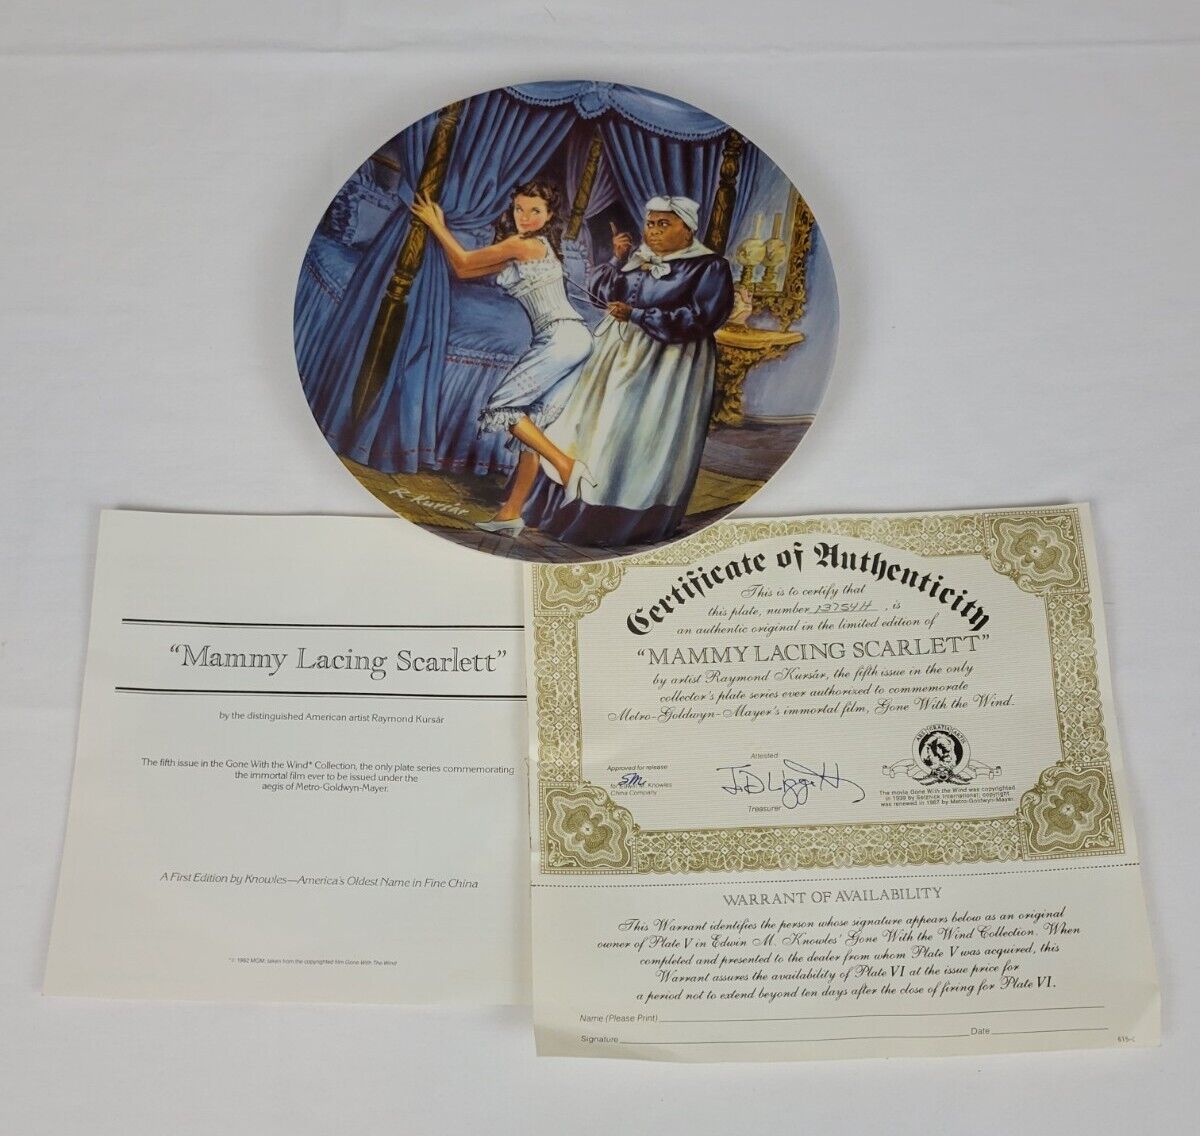 Knowles, Gone With The Wind “M@mmy Lacing Scarlett” Plate #13754 H, 1984 W/COA